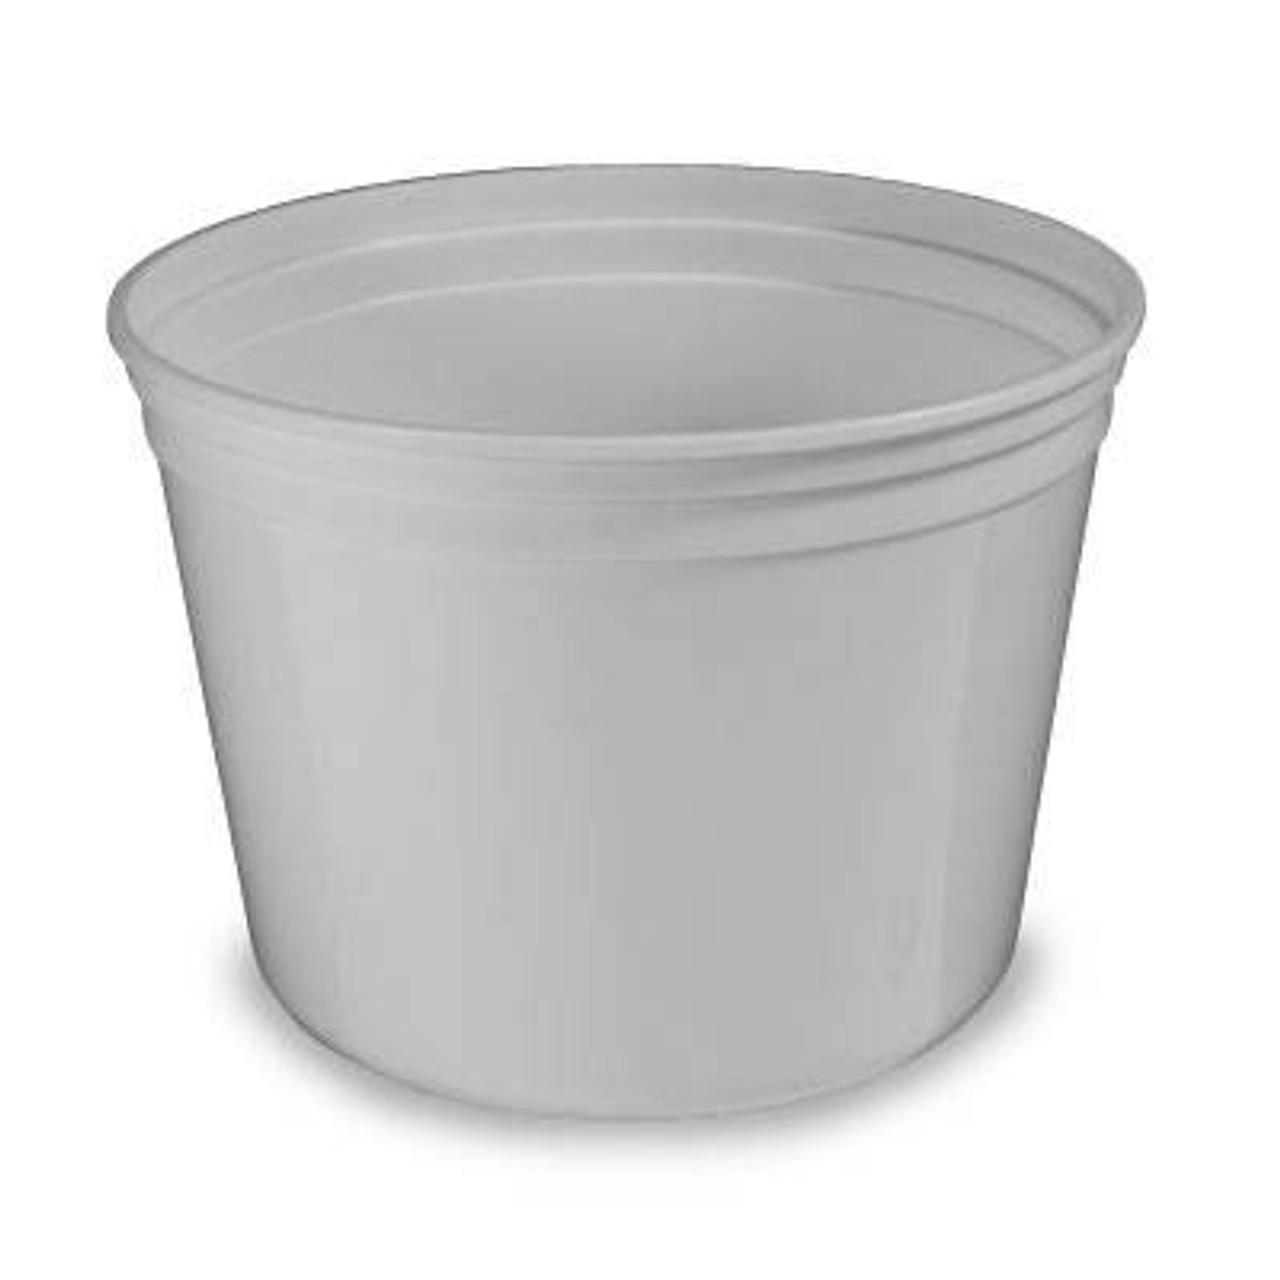 1/2 Gallon (64 oz.) BPA Free Food Grade Round Bucket with Lid (T60764B) -  starting quantity 10 count - FREE SHIPPING